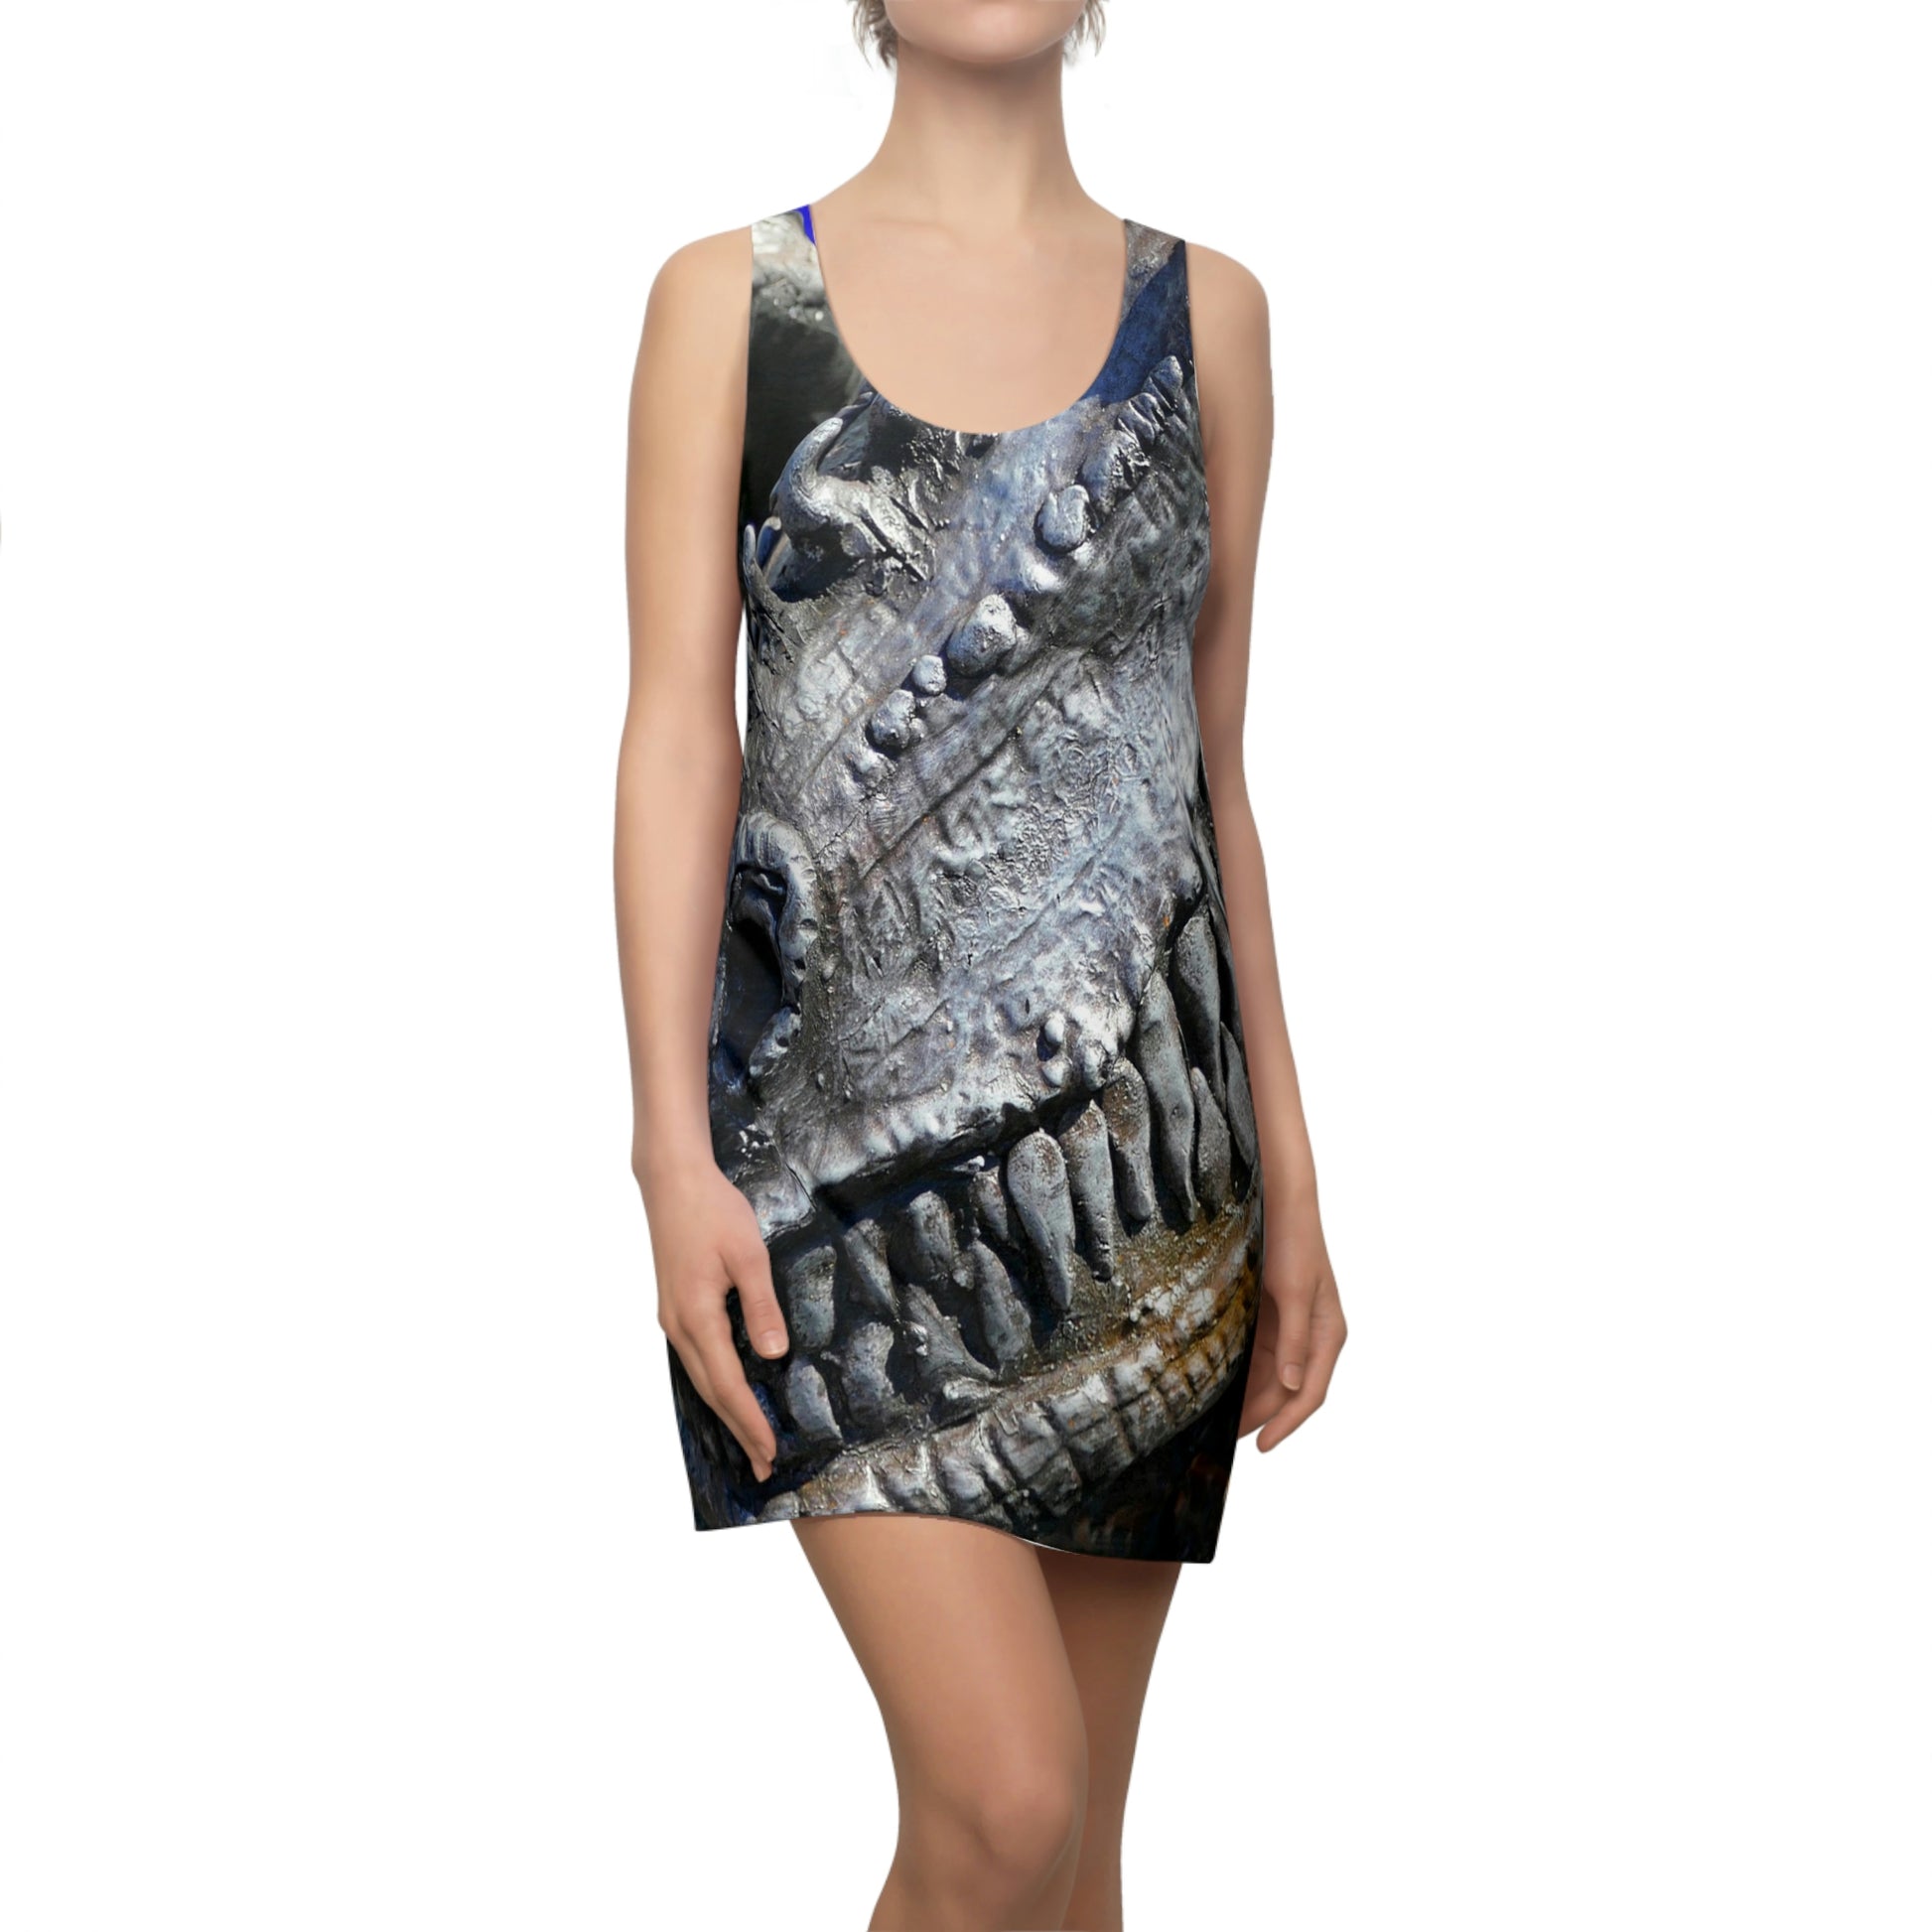 Delectable Vision - Women's All-Over Print Racerback Dress - Fry1Productions